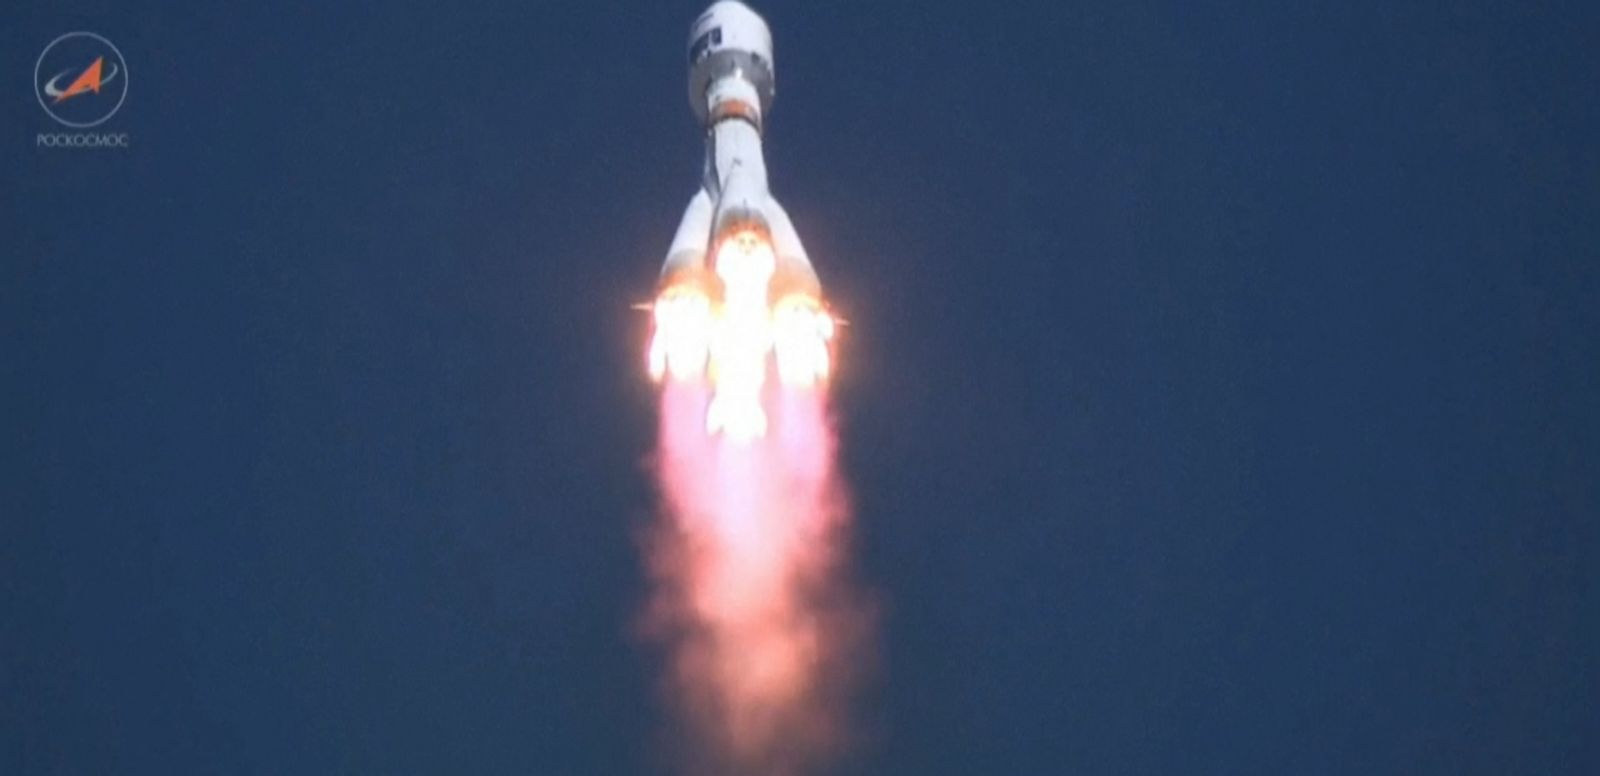 Russia Launches First Rocket From New Spaceport to Vladimir Putin's Relief - ABC News